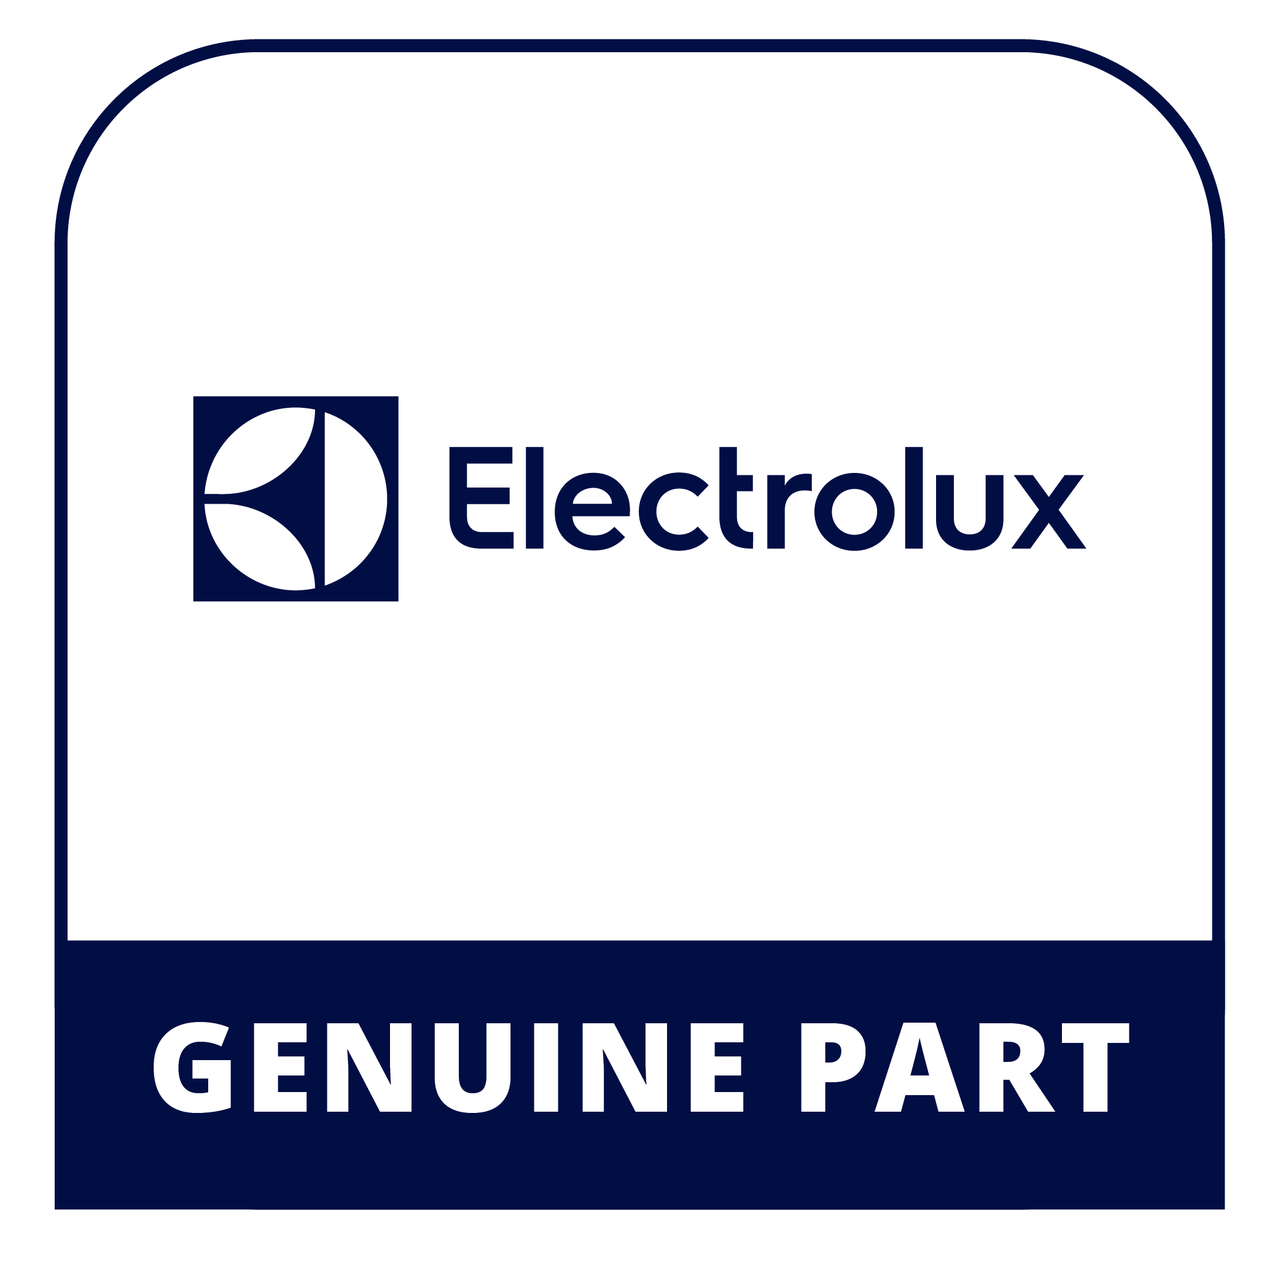 Frigidaire - Electrolux 318203856 Owners Manual - Genuine Electrolux Part